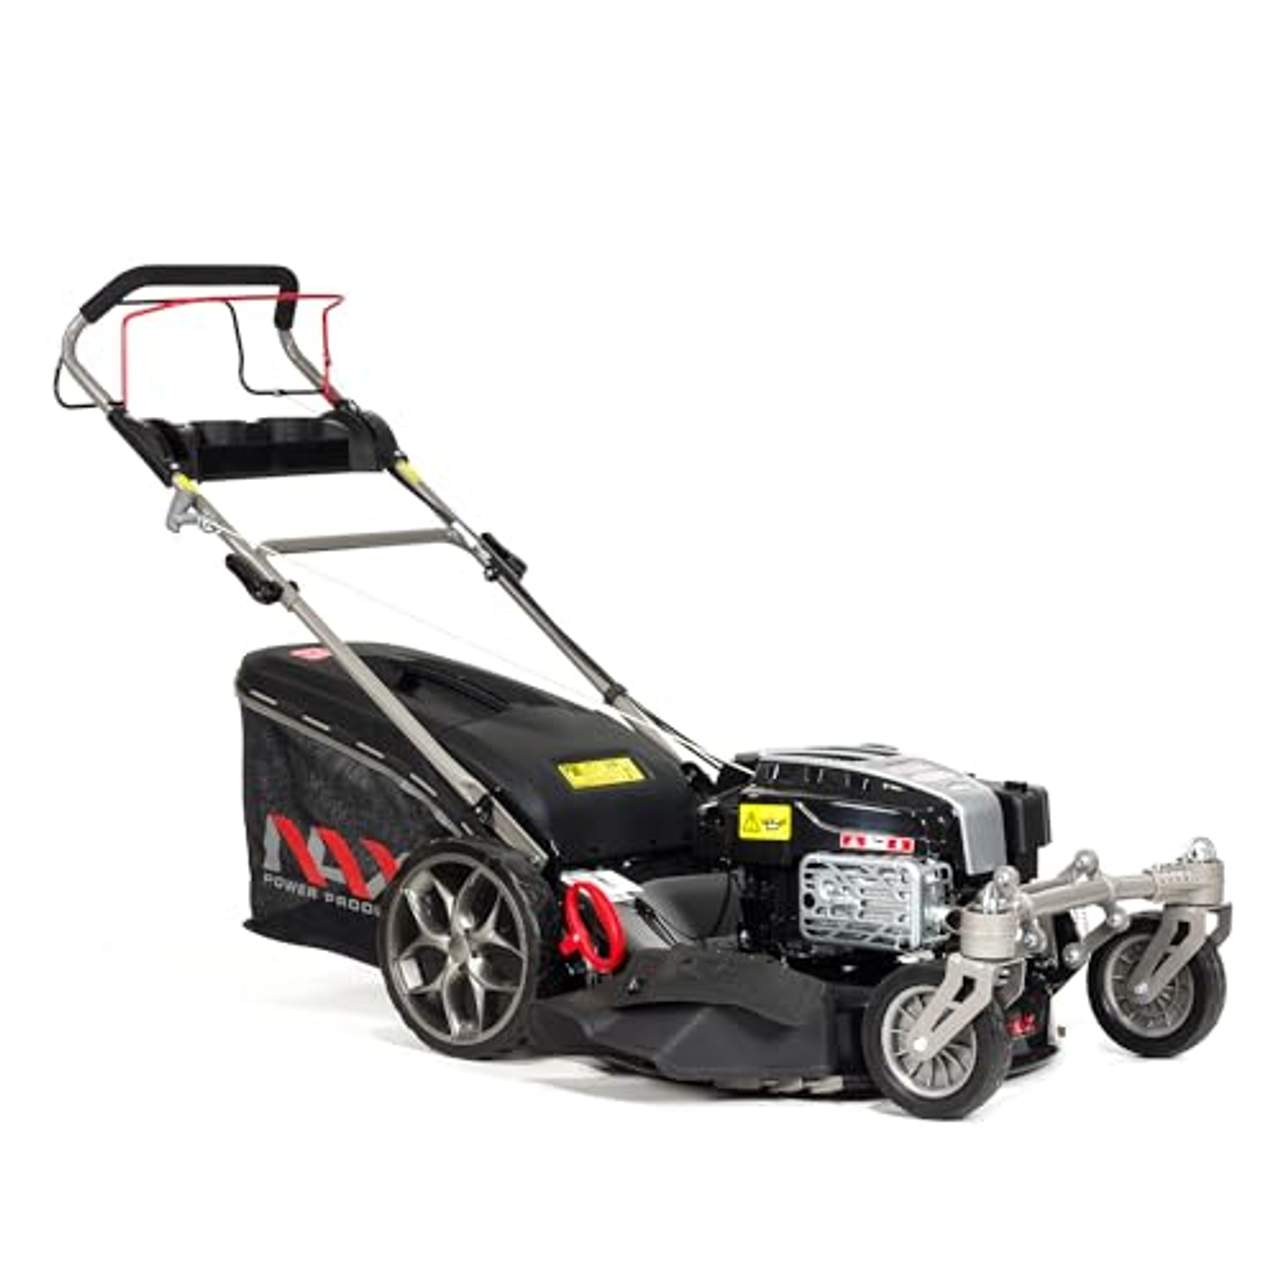 NAX Power Products Briggs & Stratton 5000S Motor 875Exi Serie